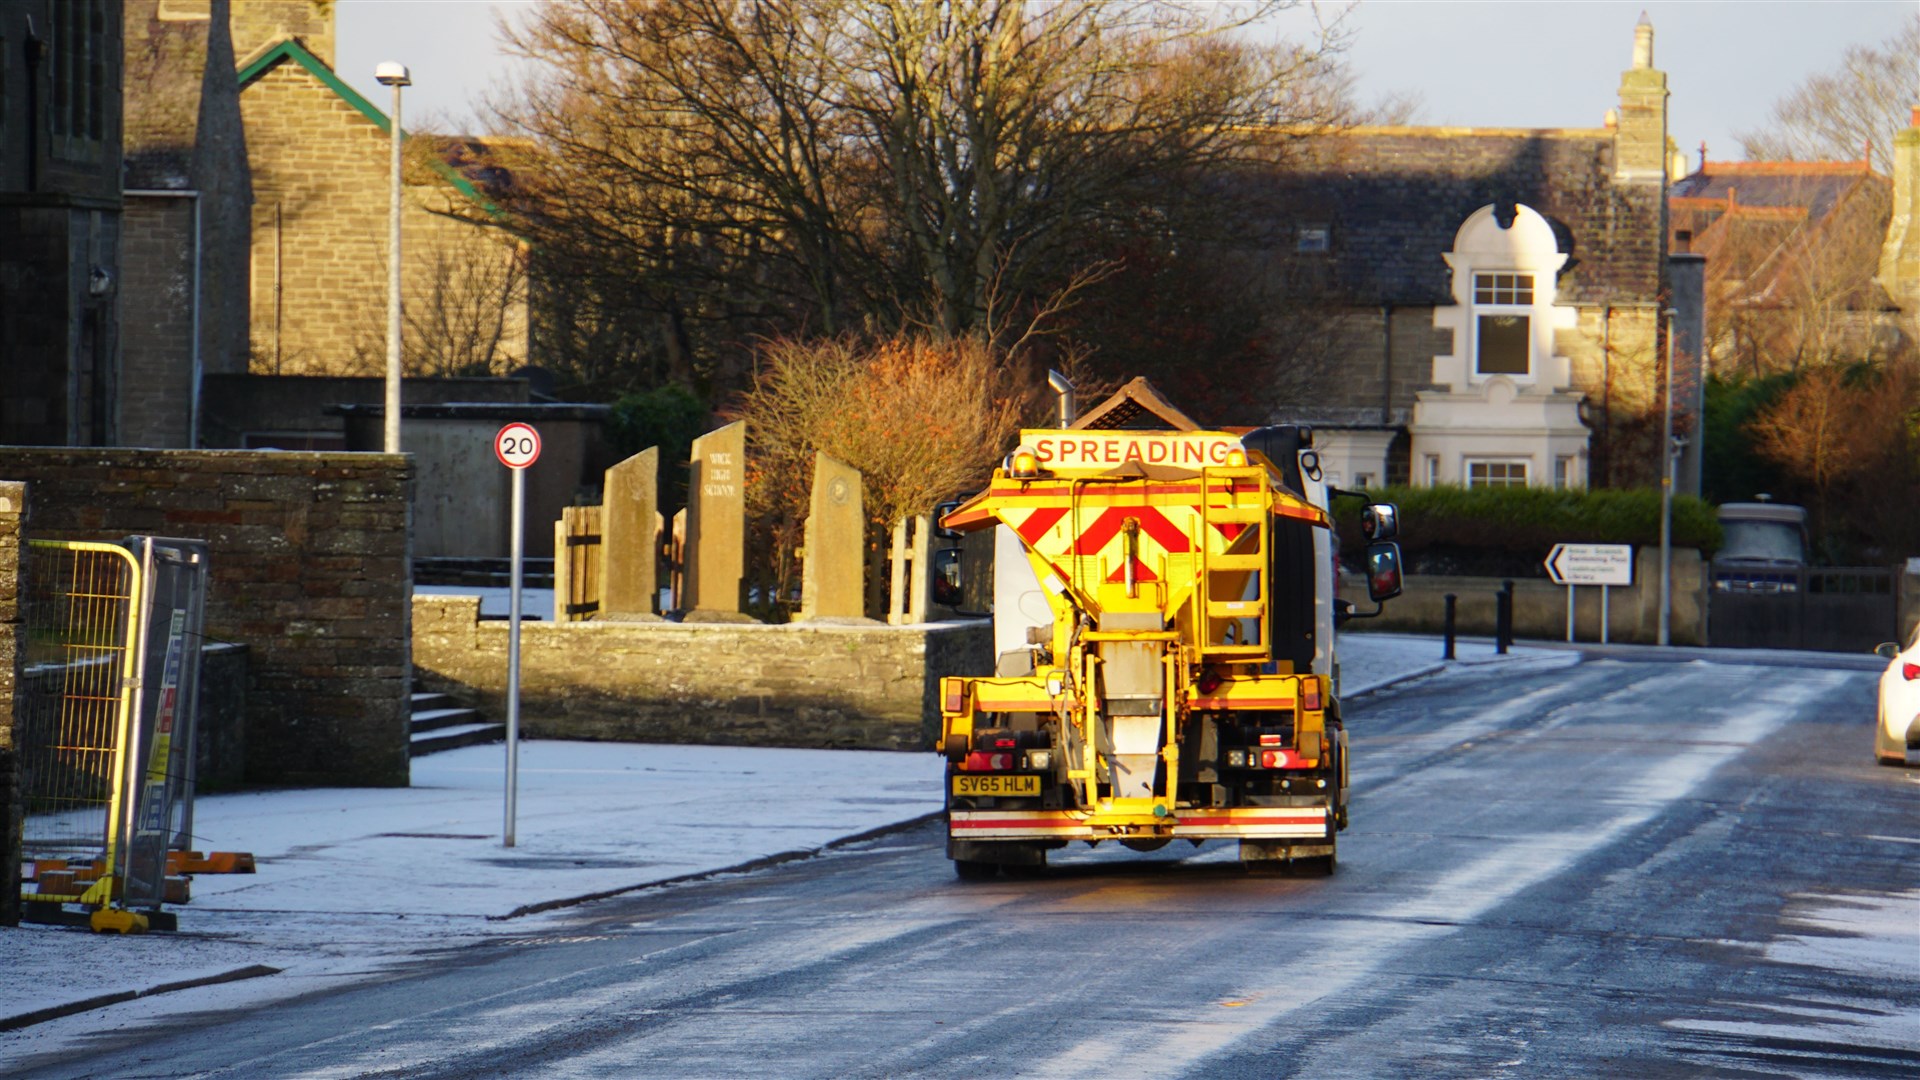 The council is prepared for winter gritting, members have been told.